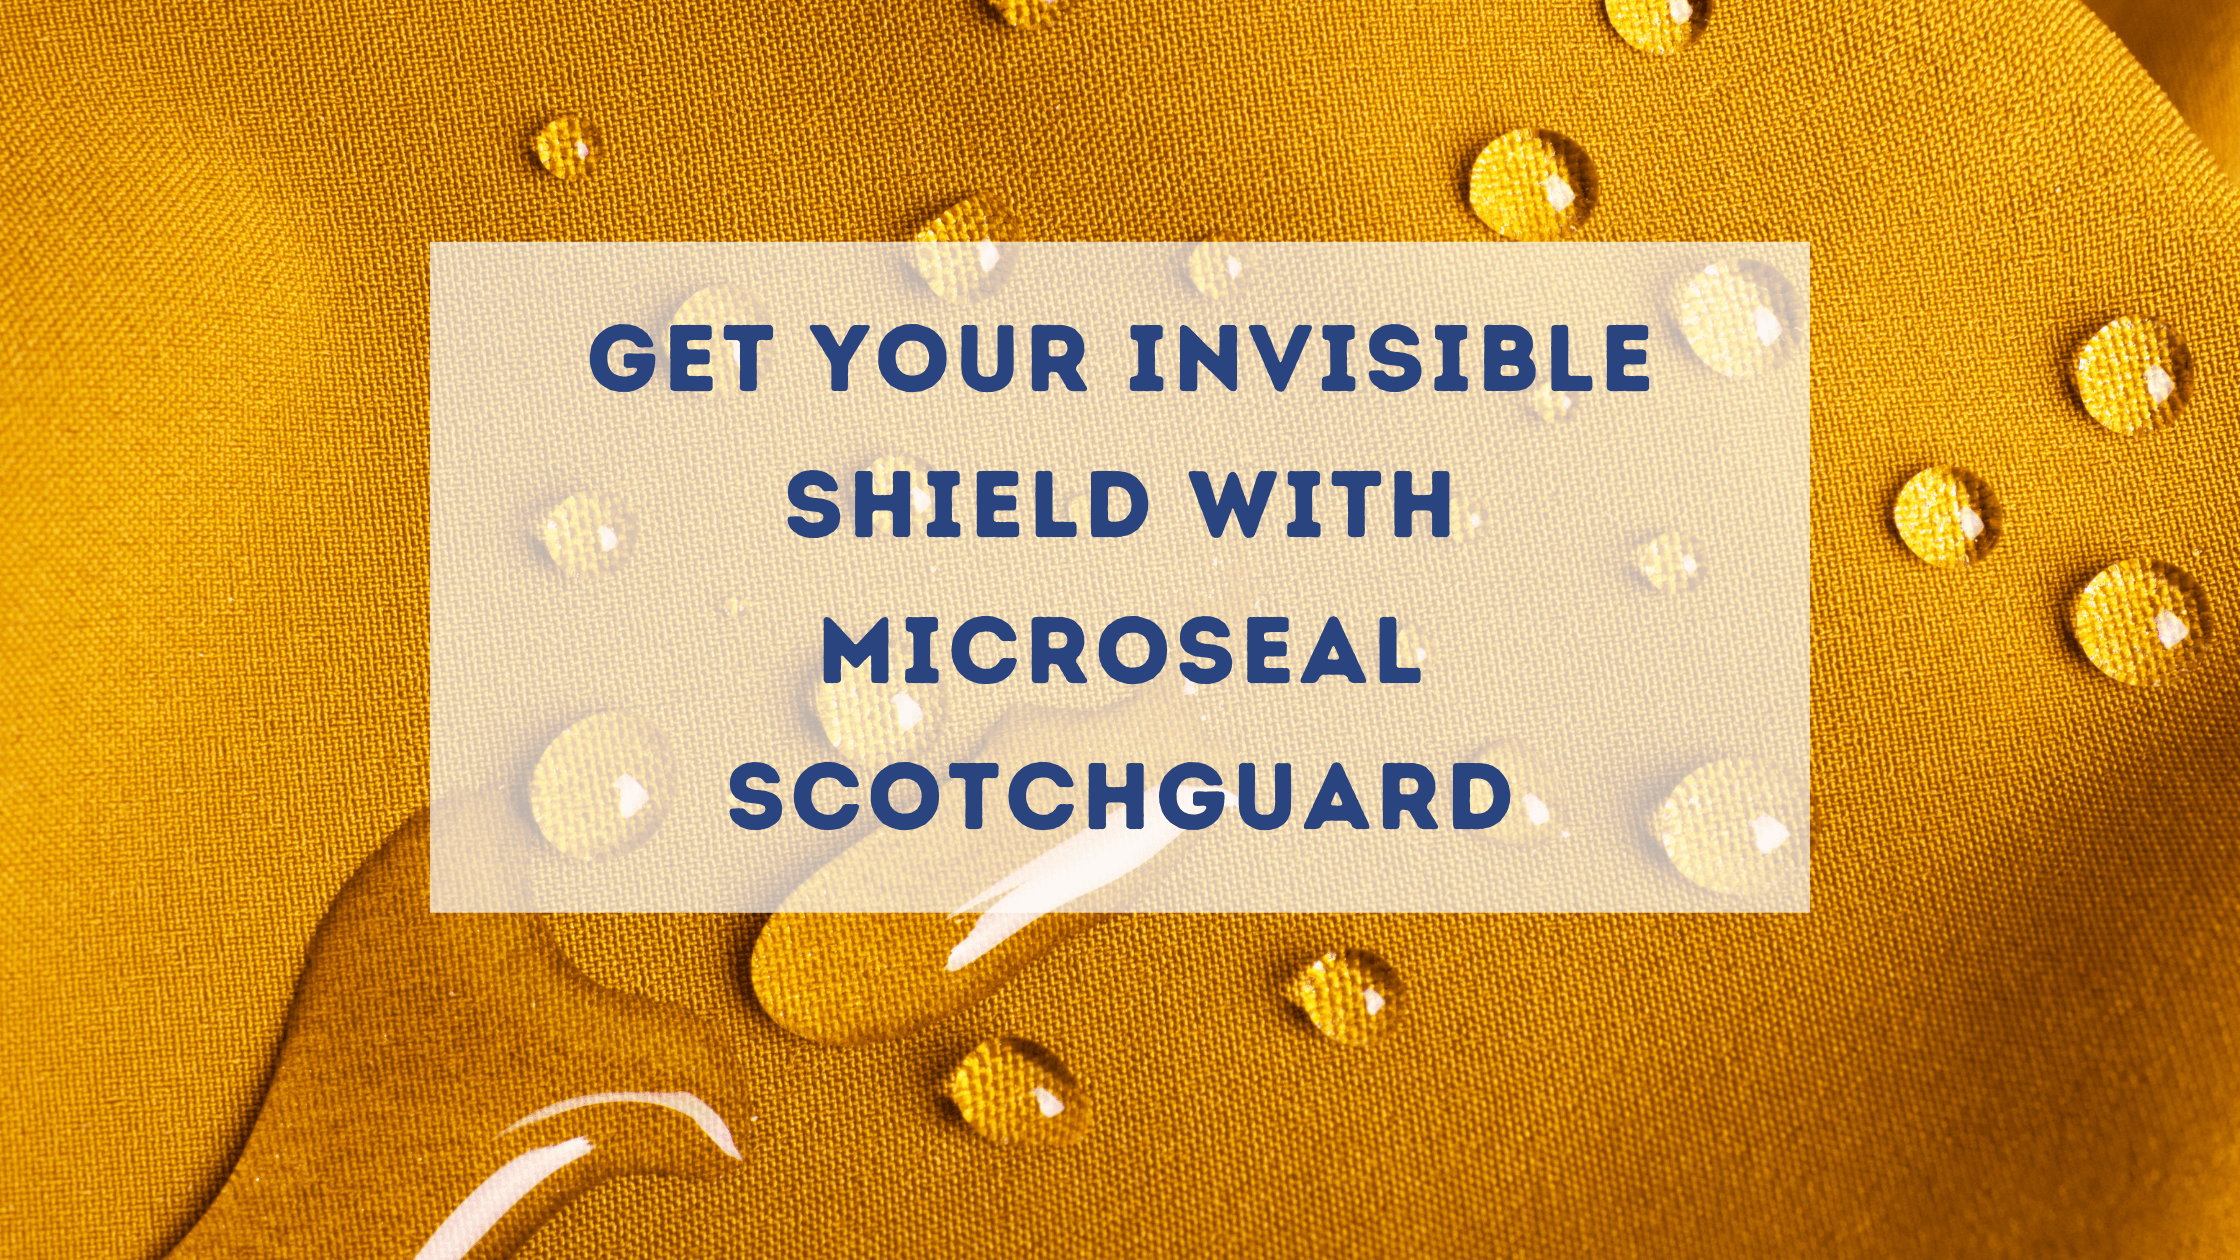 Get your invisible shield with Citrus Clean Scotchguard by Microseal 1